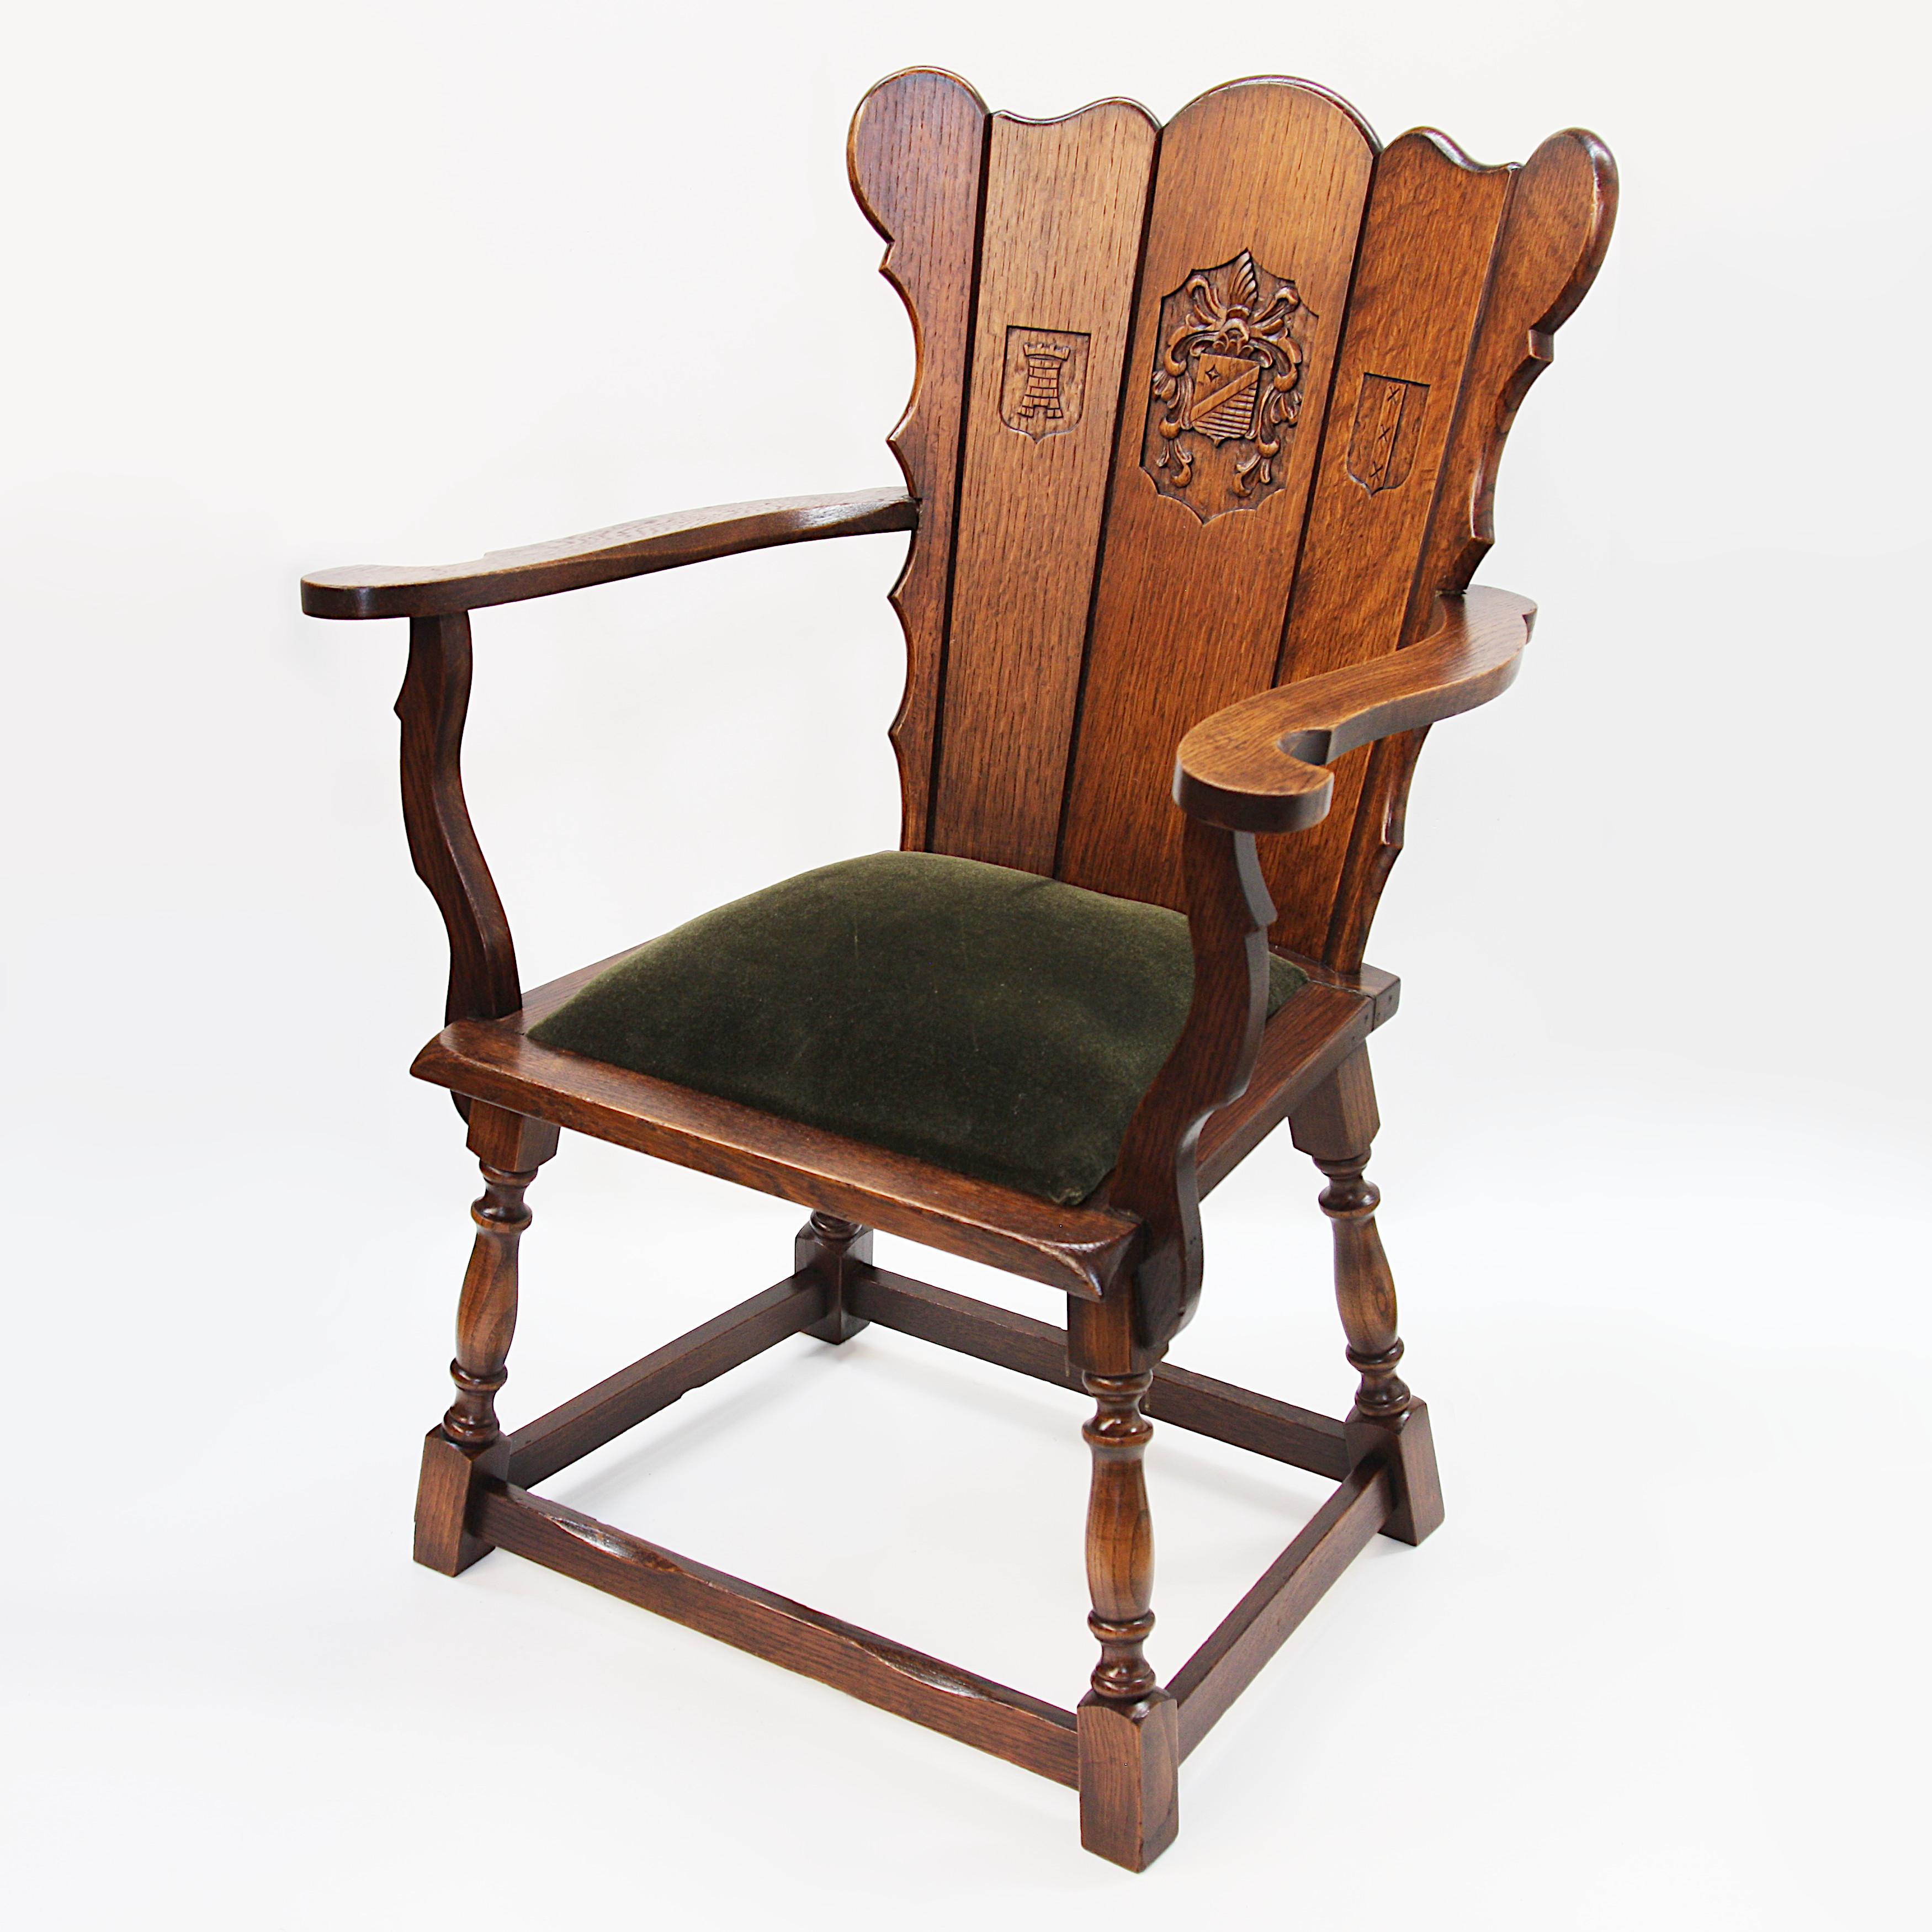 Wonderful early 20th century Dutch arm chair. Chair features solid oak construction, green mohair seat, and Classic medieval-revival design with relief-carved coats of arms. The right-side carving appears to be the Amsterdam coat of arms. The